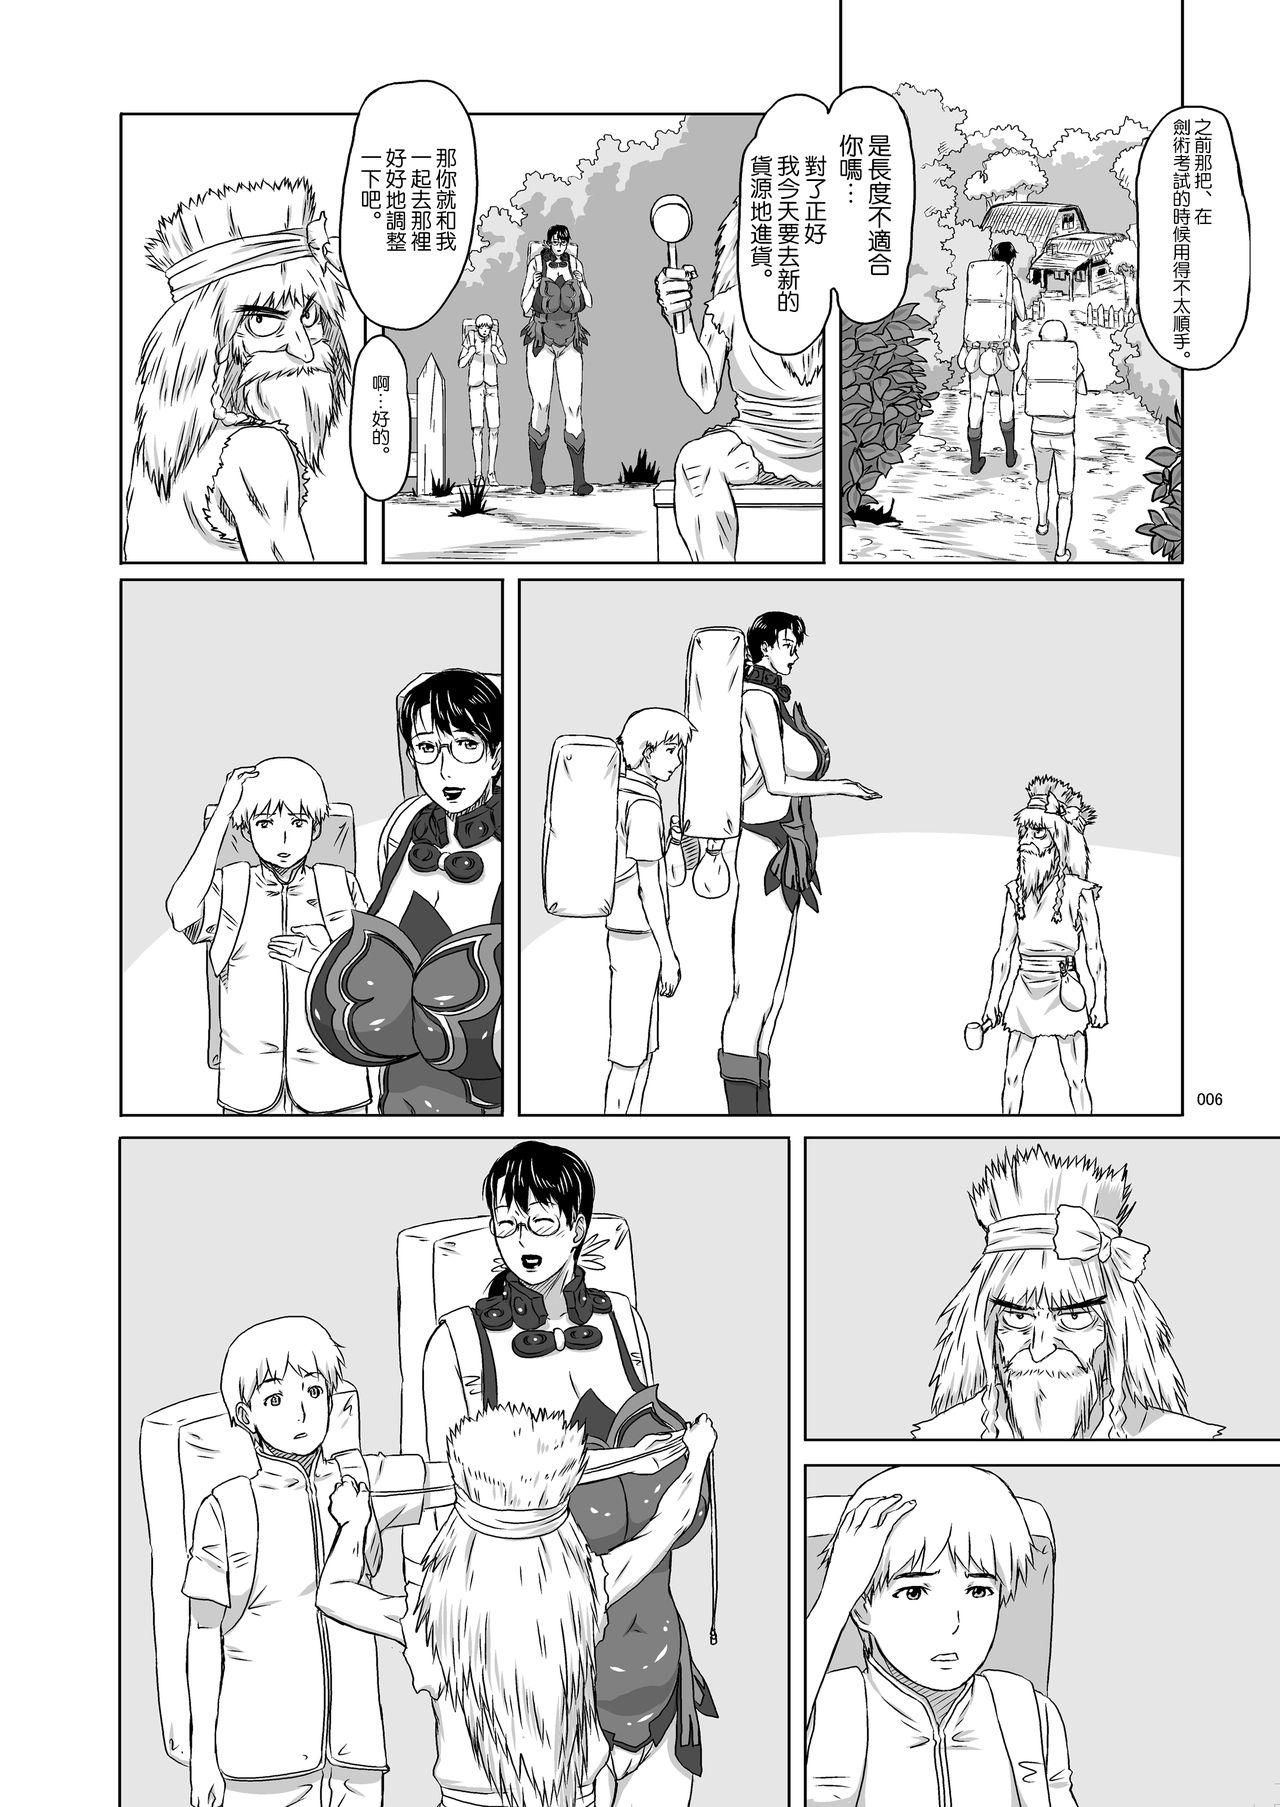 Top Package-Meat 7 - Queens blade Gag - Page 7